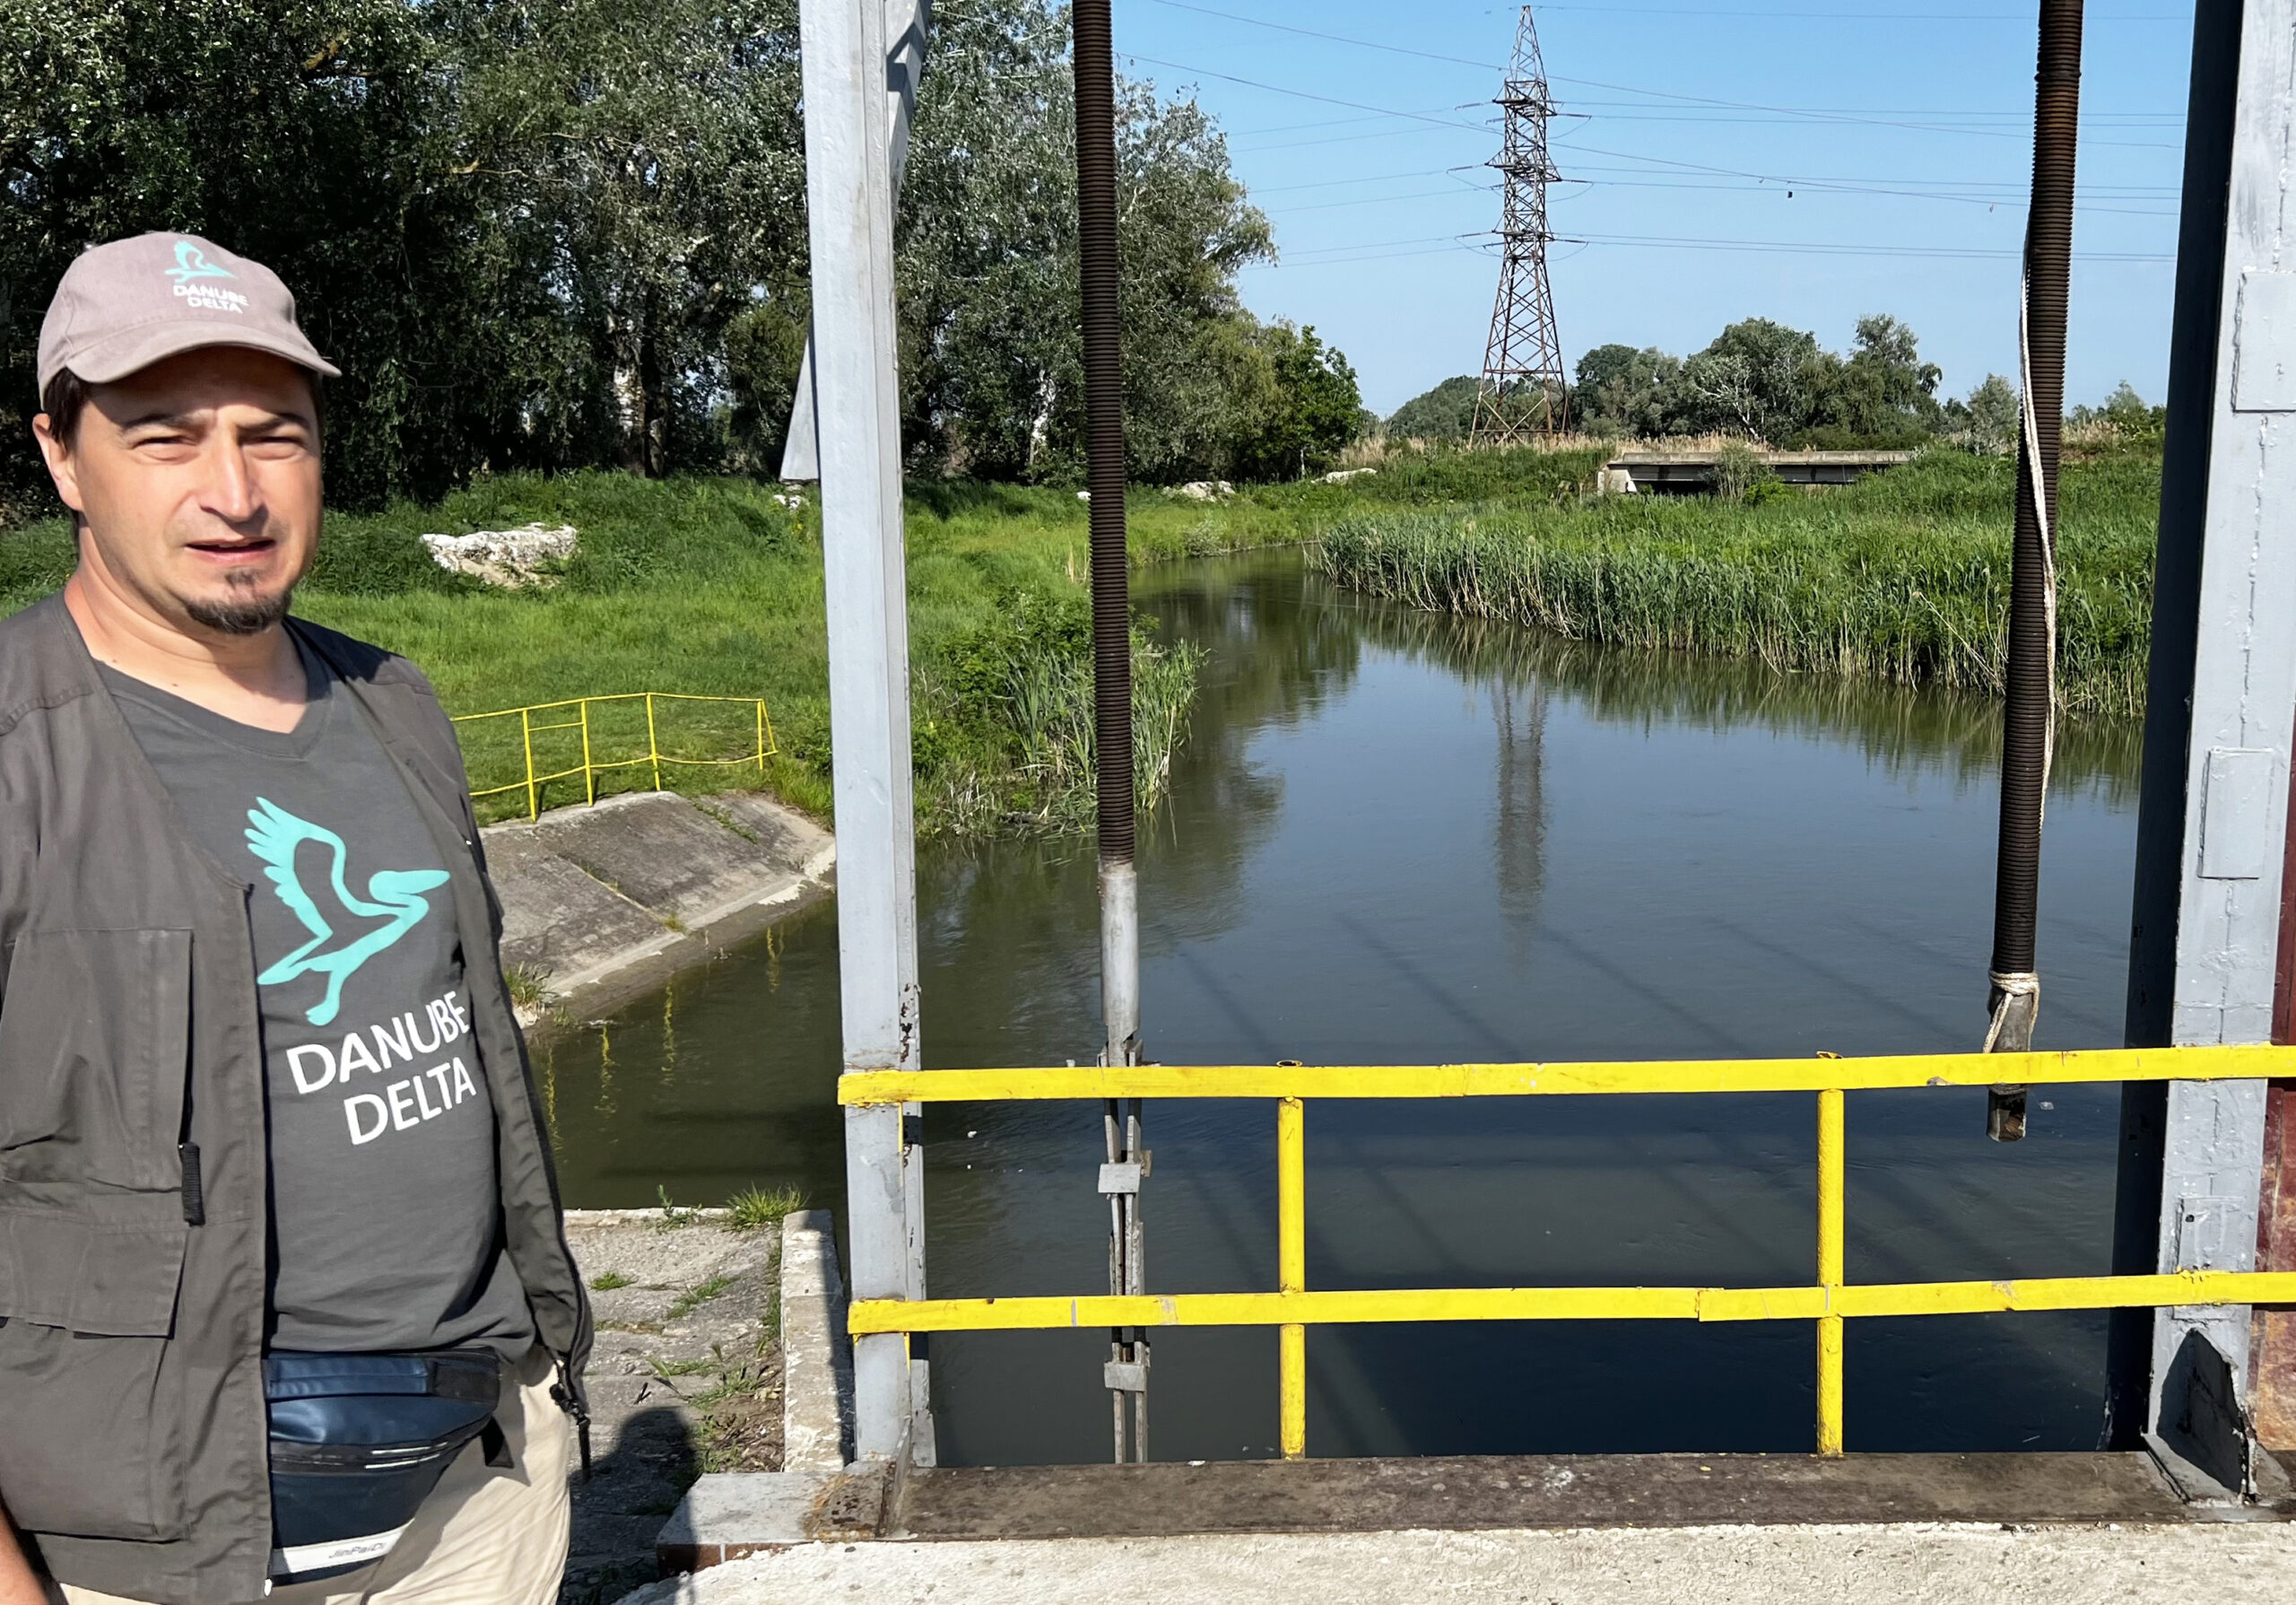 As part of the ongoing work at the lake, this channel has been opened to allow the greater river system of the Danube Delta to flow freely.